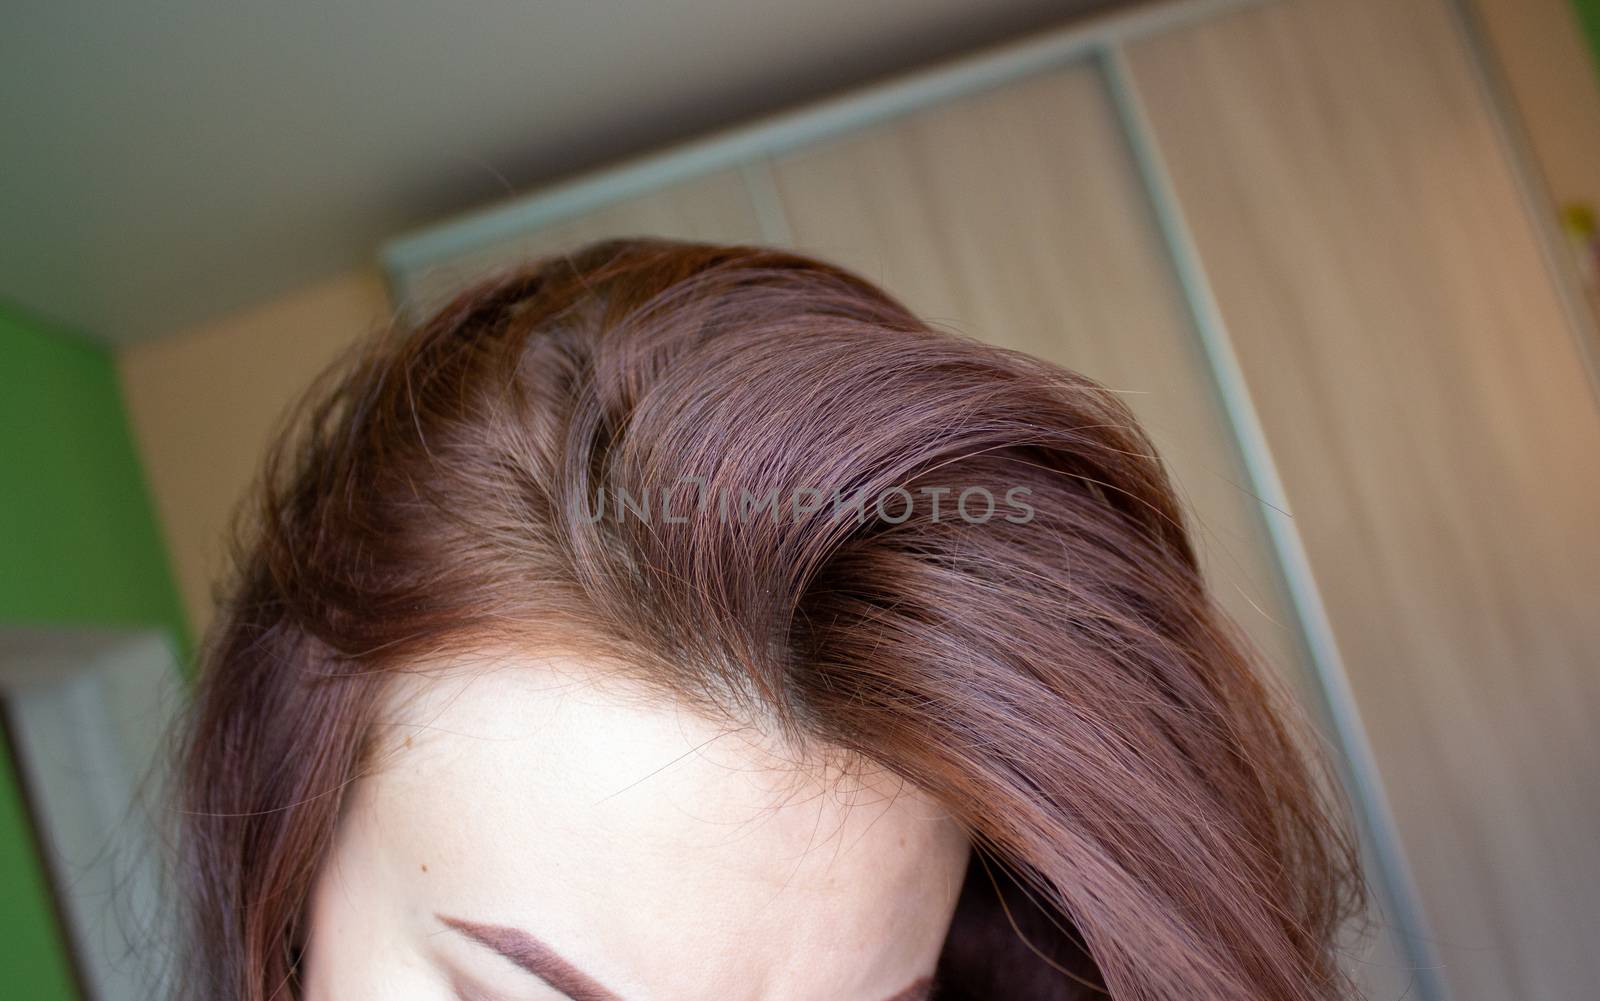 hair on a woman's head close-up. Hair brown color of. by AnatoliiFoto